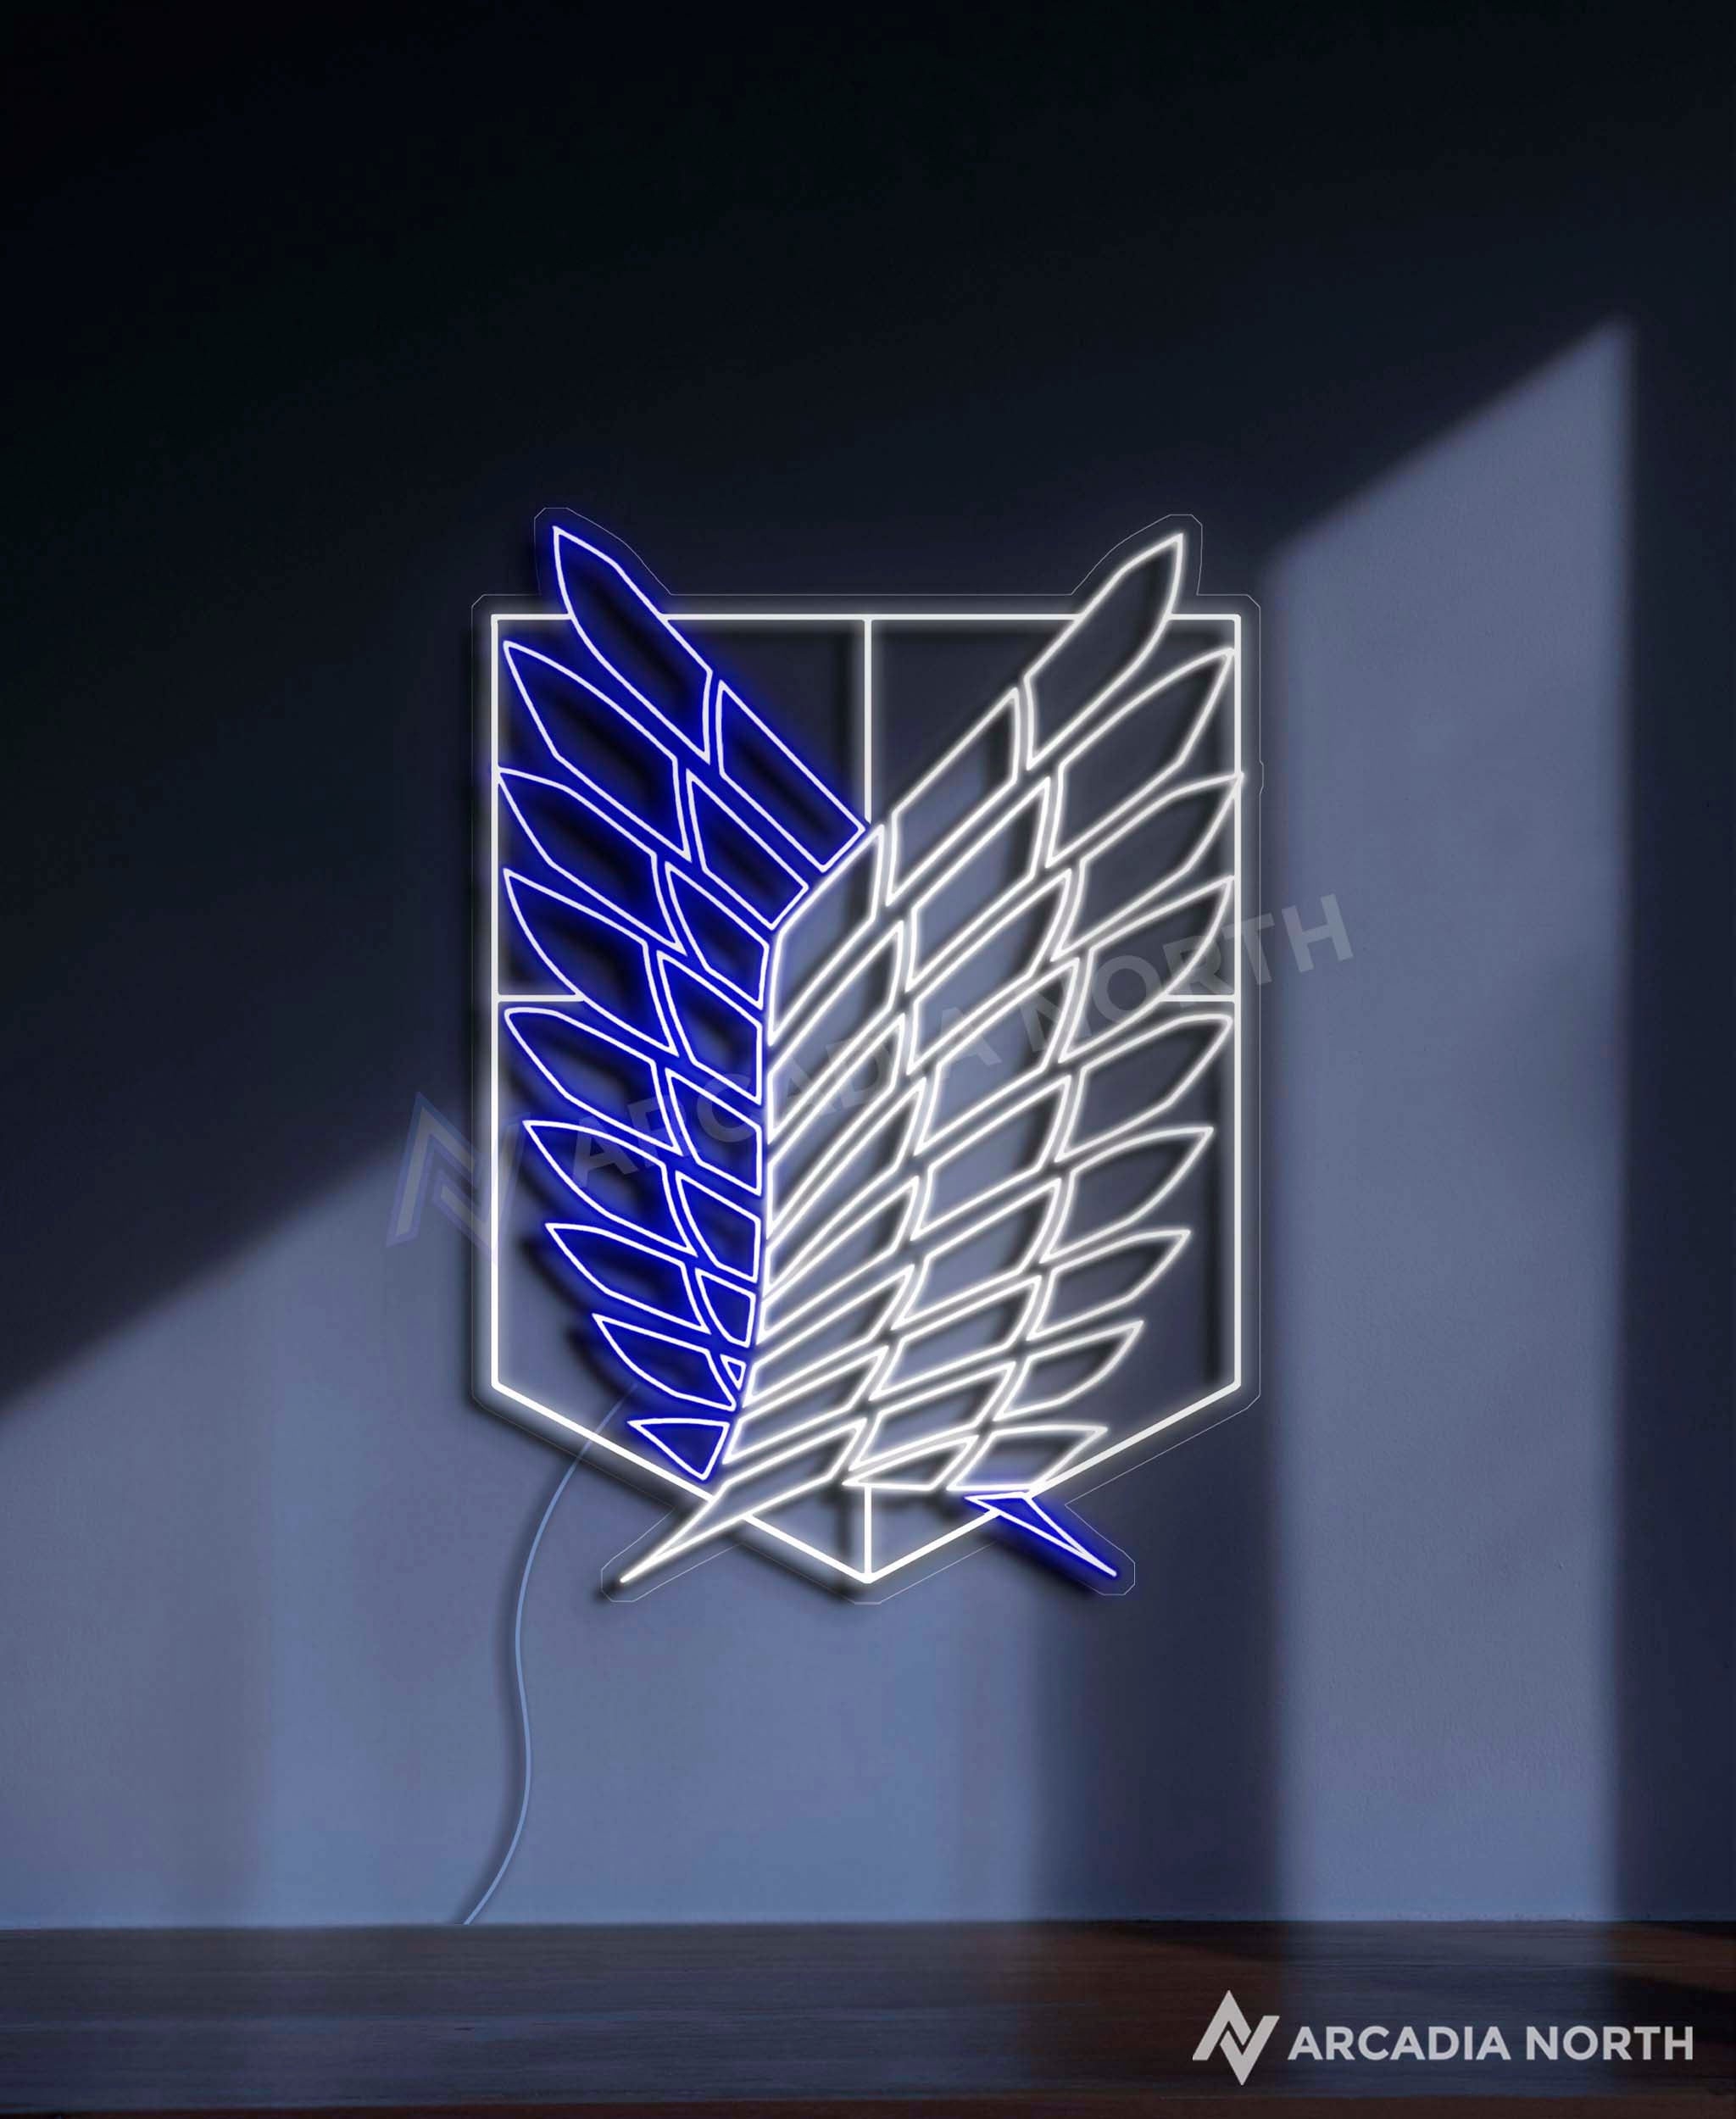 Attack on Titan Wings of Freedom anime neon sign by Arcadia North